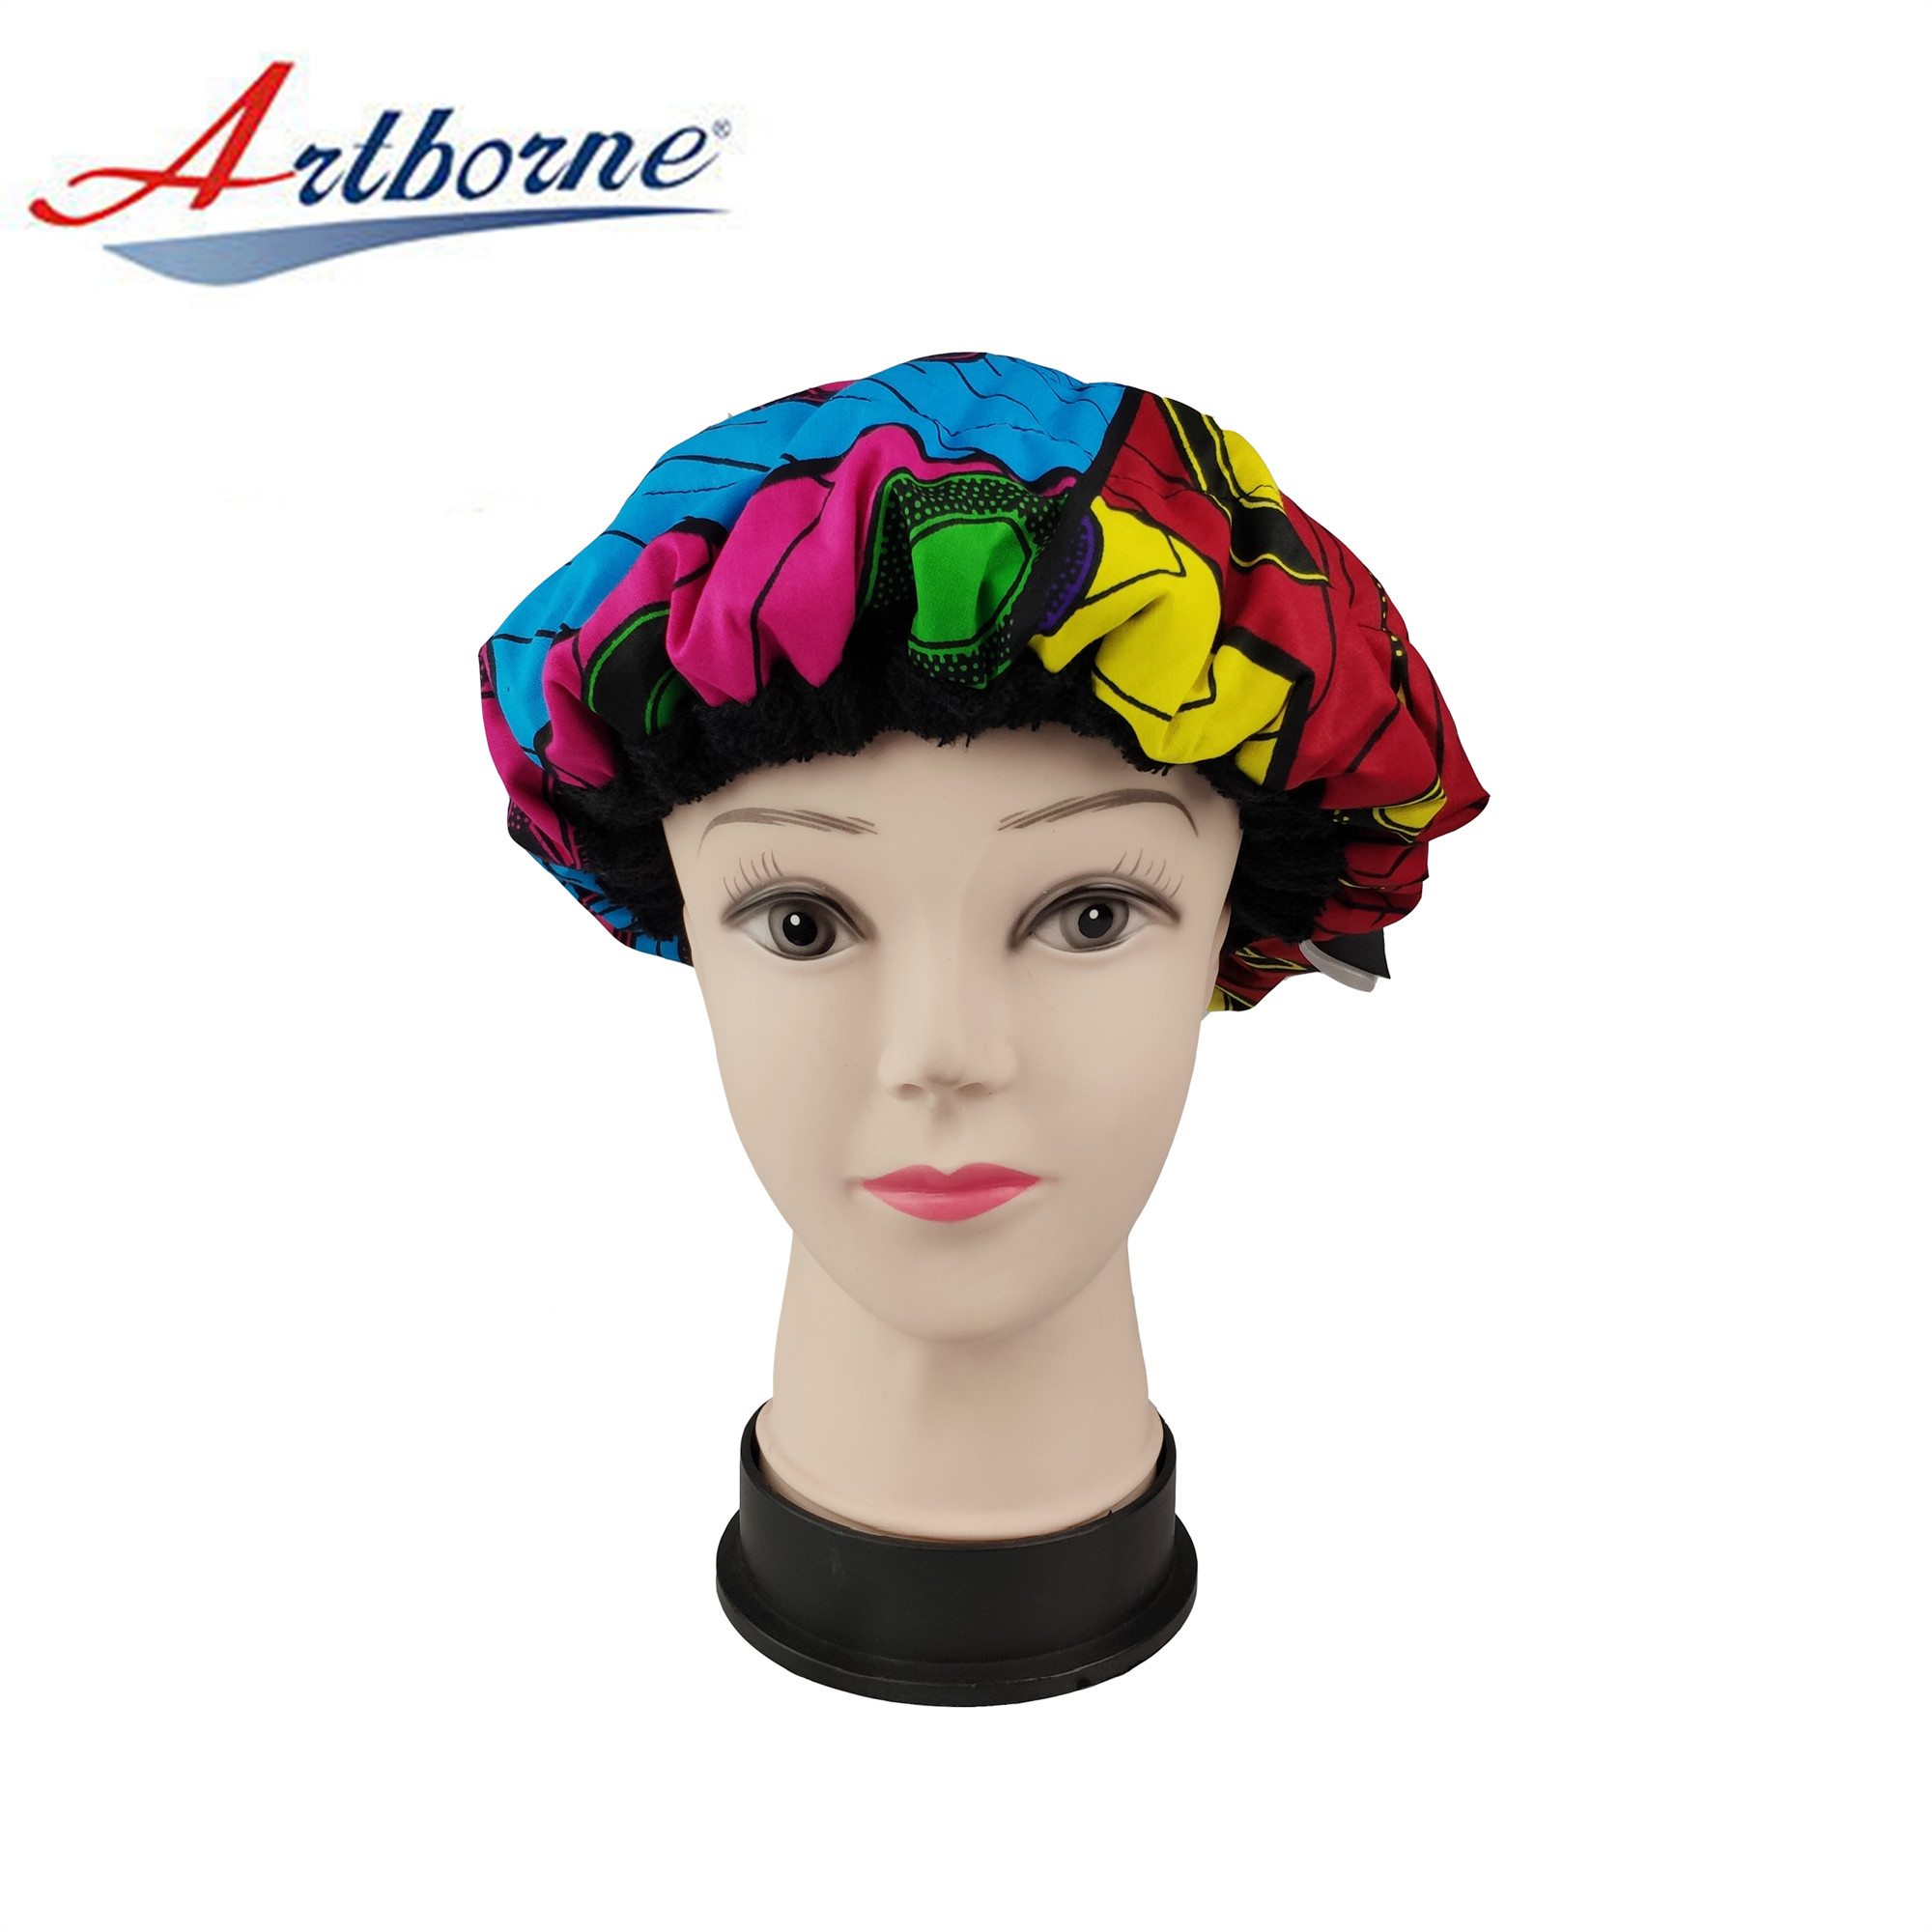 Artborne therapy shower cap for women suppliers for lady-33